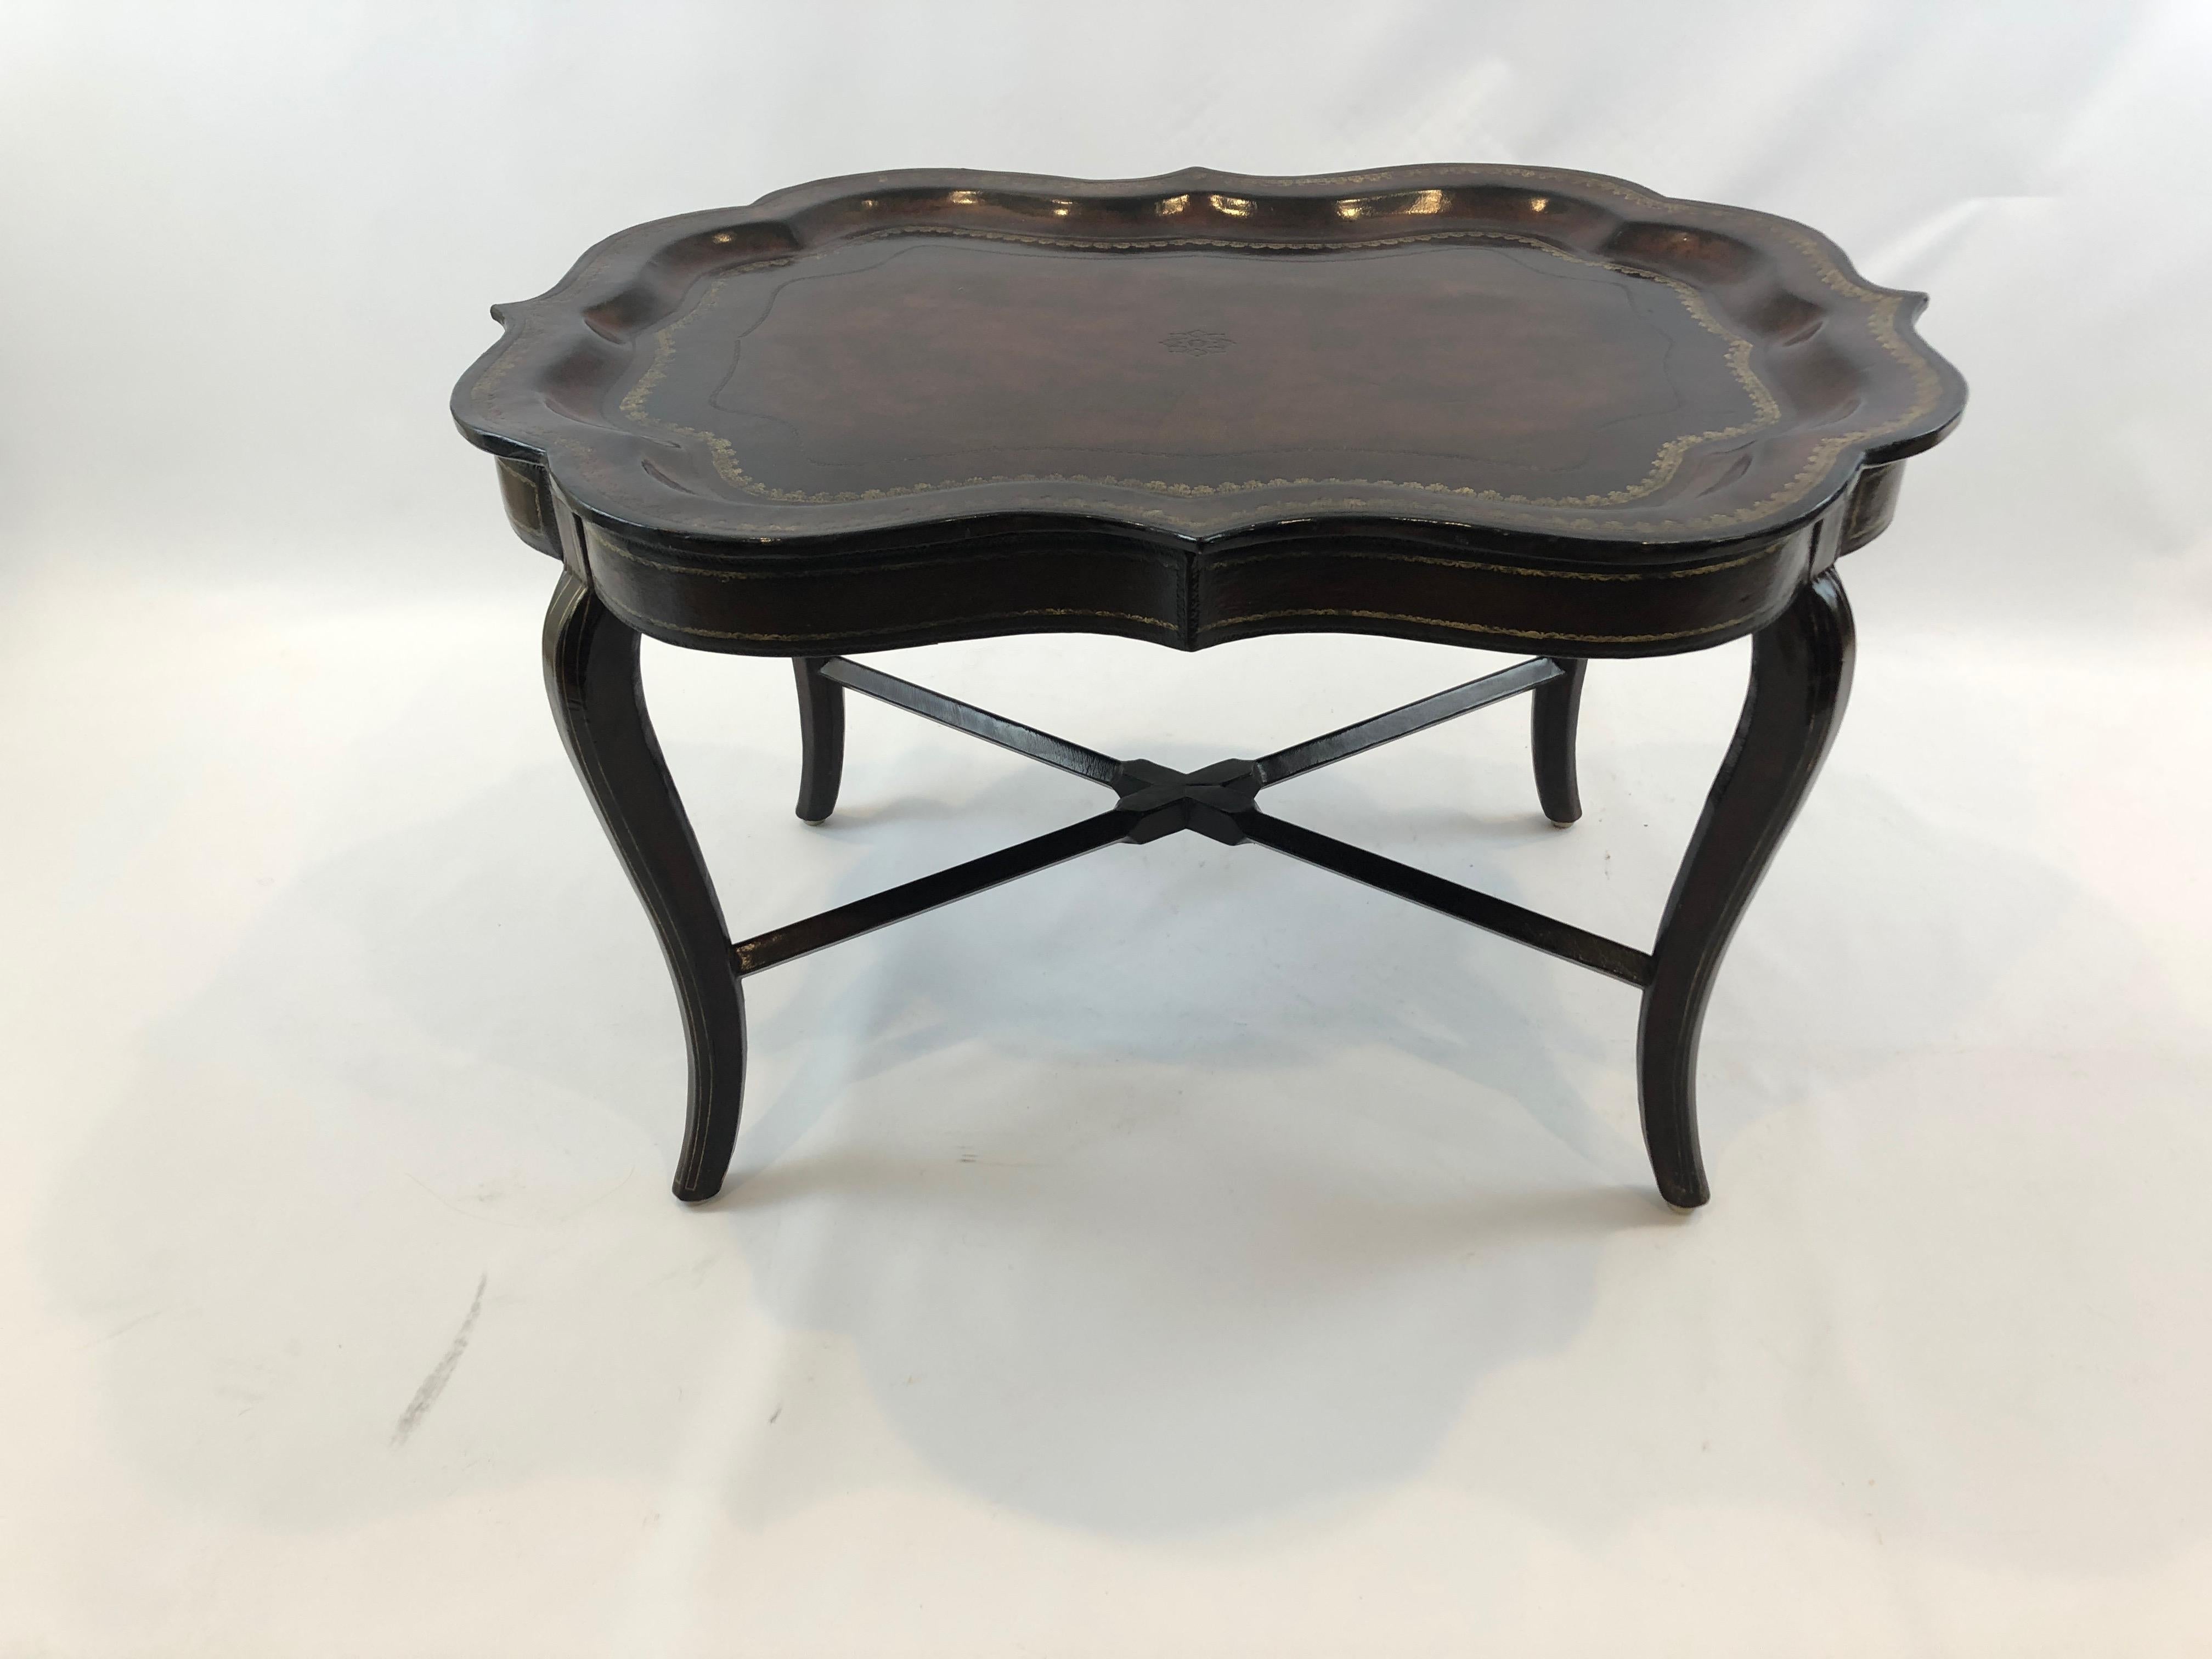 Sublimely Crafted Leather Wrapped Tray Coffee Table by Maitland Smith 6